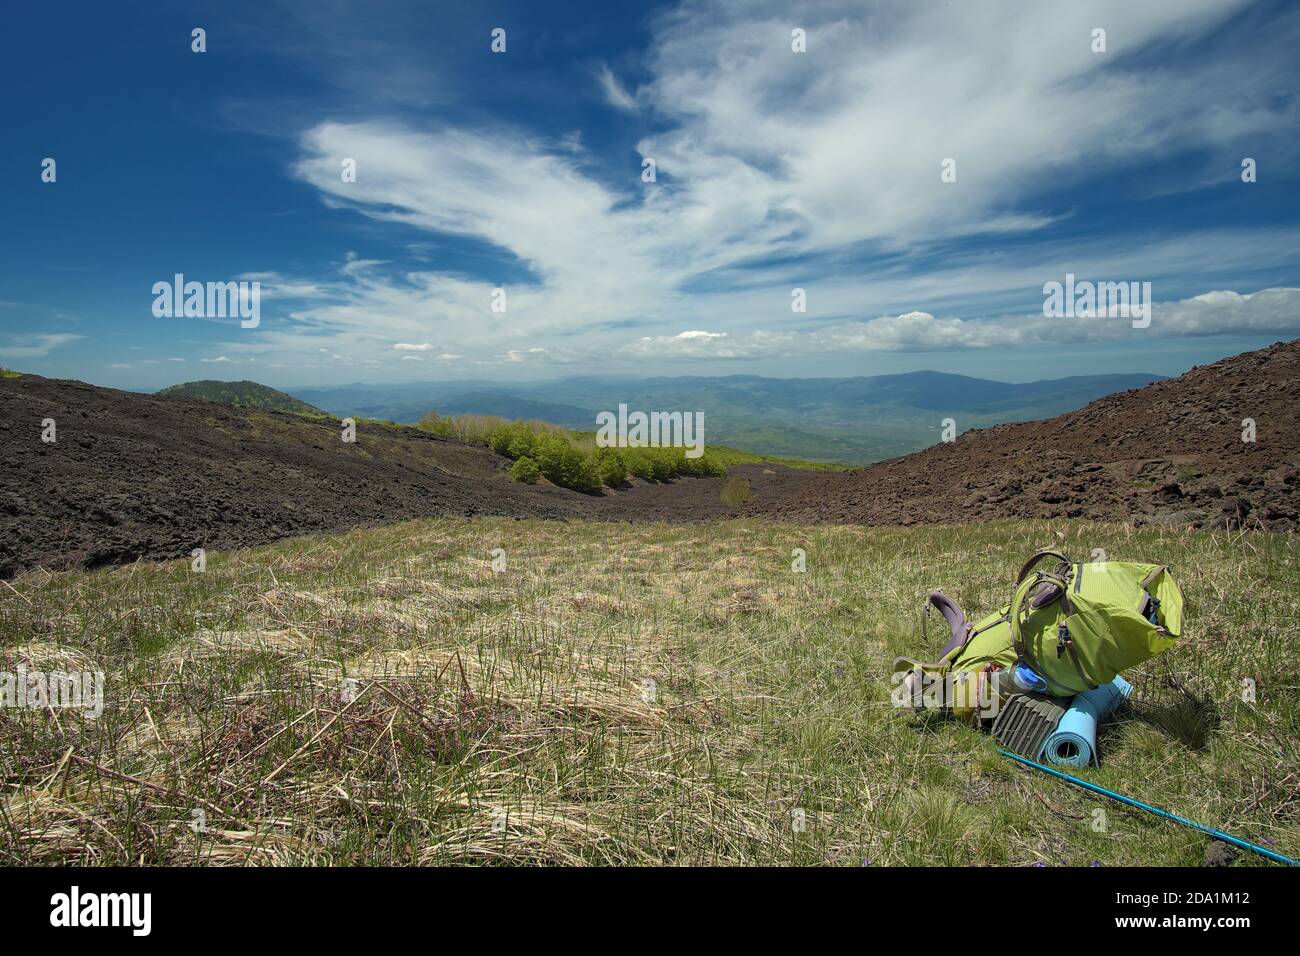 green backpack in mountain landscape of Etna Park, Sicily Stock Photo